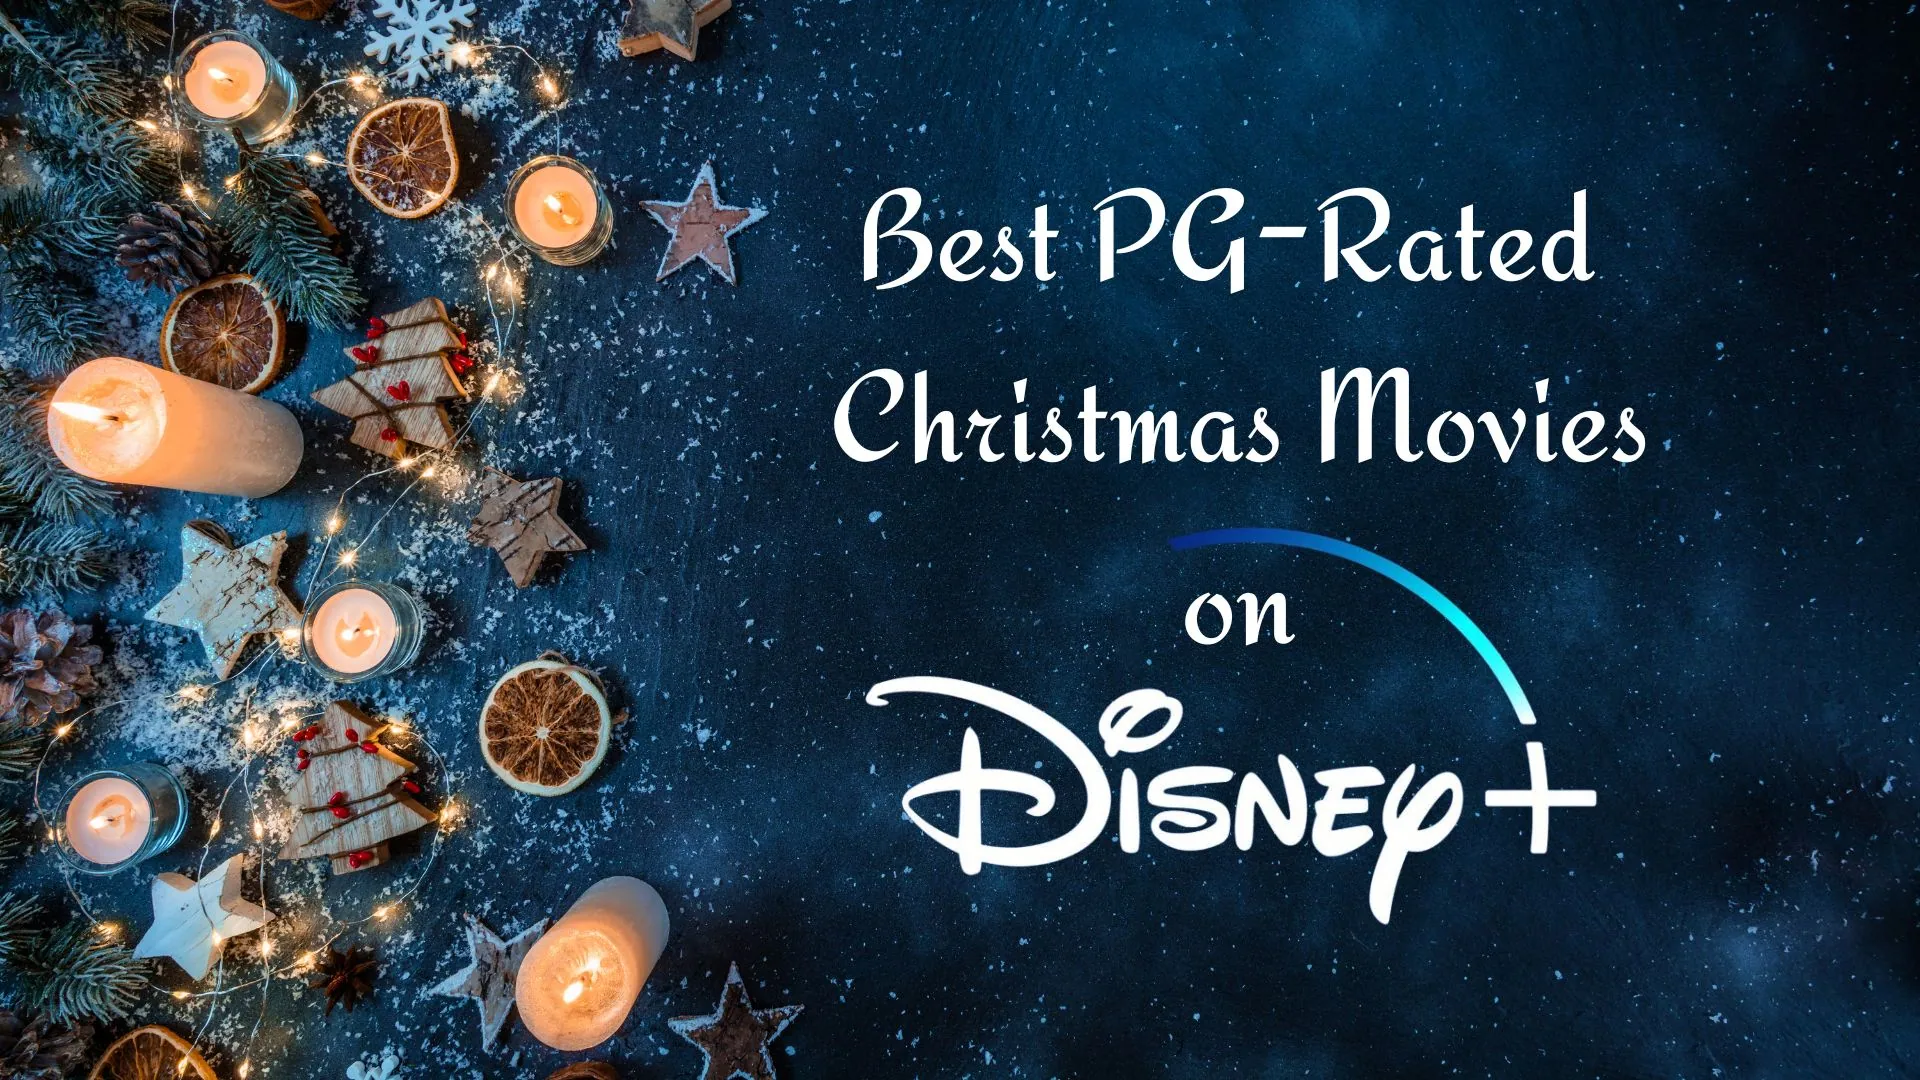 Best PG-Rated Christmas Movies on Disney Plus